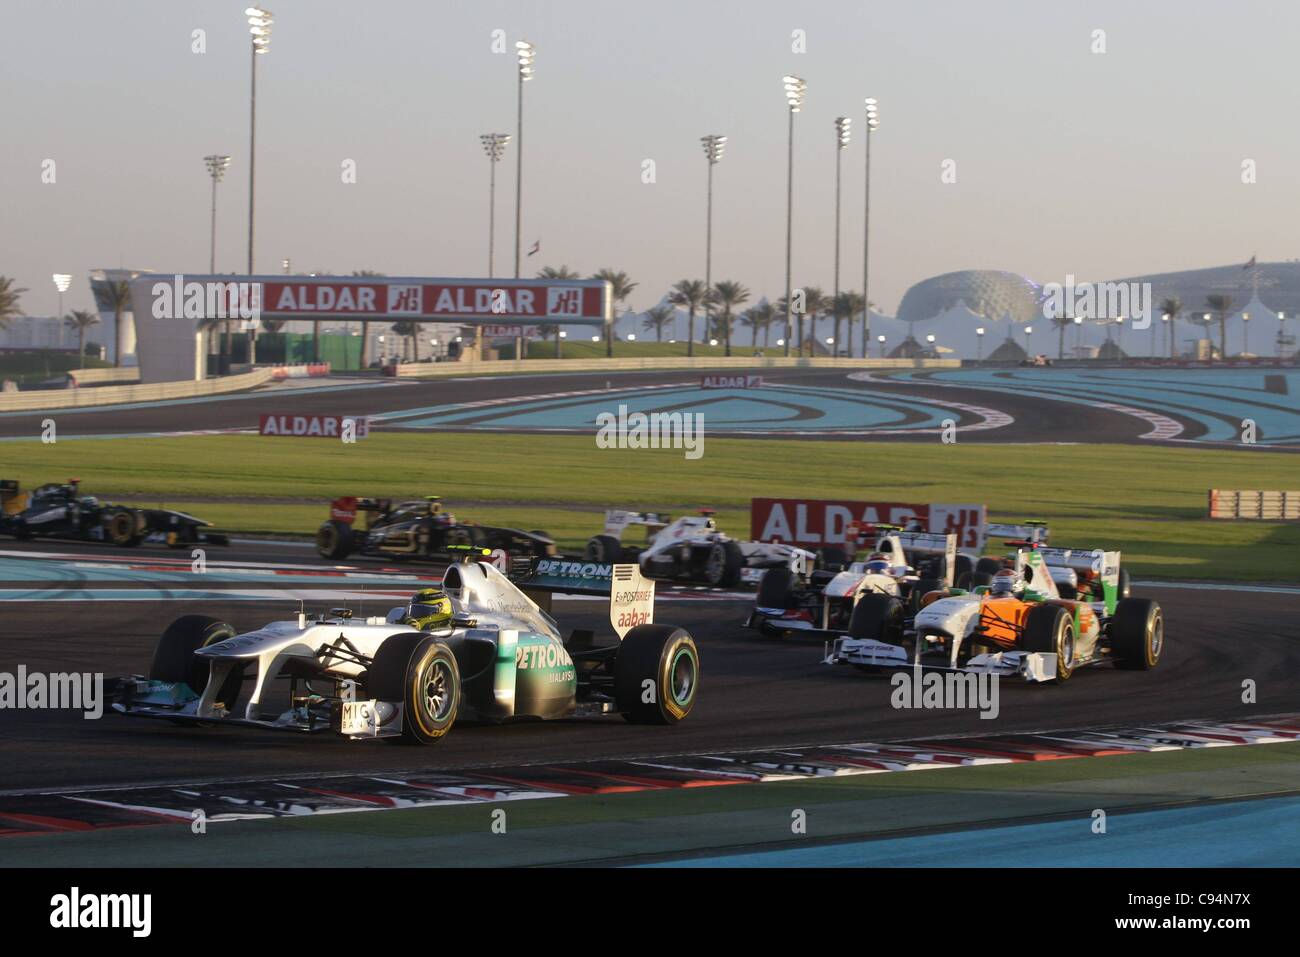 13.11.2011. Abu Dhabi.   Nico Rosberg Mercedes GP GP Abu Dhabi 2011 Formula 1 Grand Prix Abu Dhabi  . Hamilton won the race superbly in front of Alonso with Button in thrid place. Vettel retired on lap 1 of the race. Stock Photo